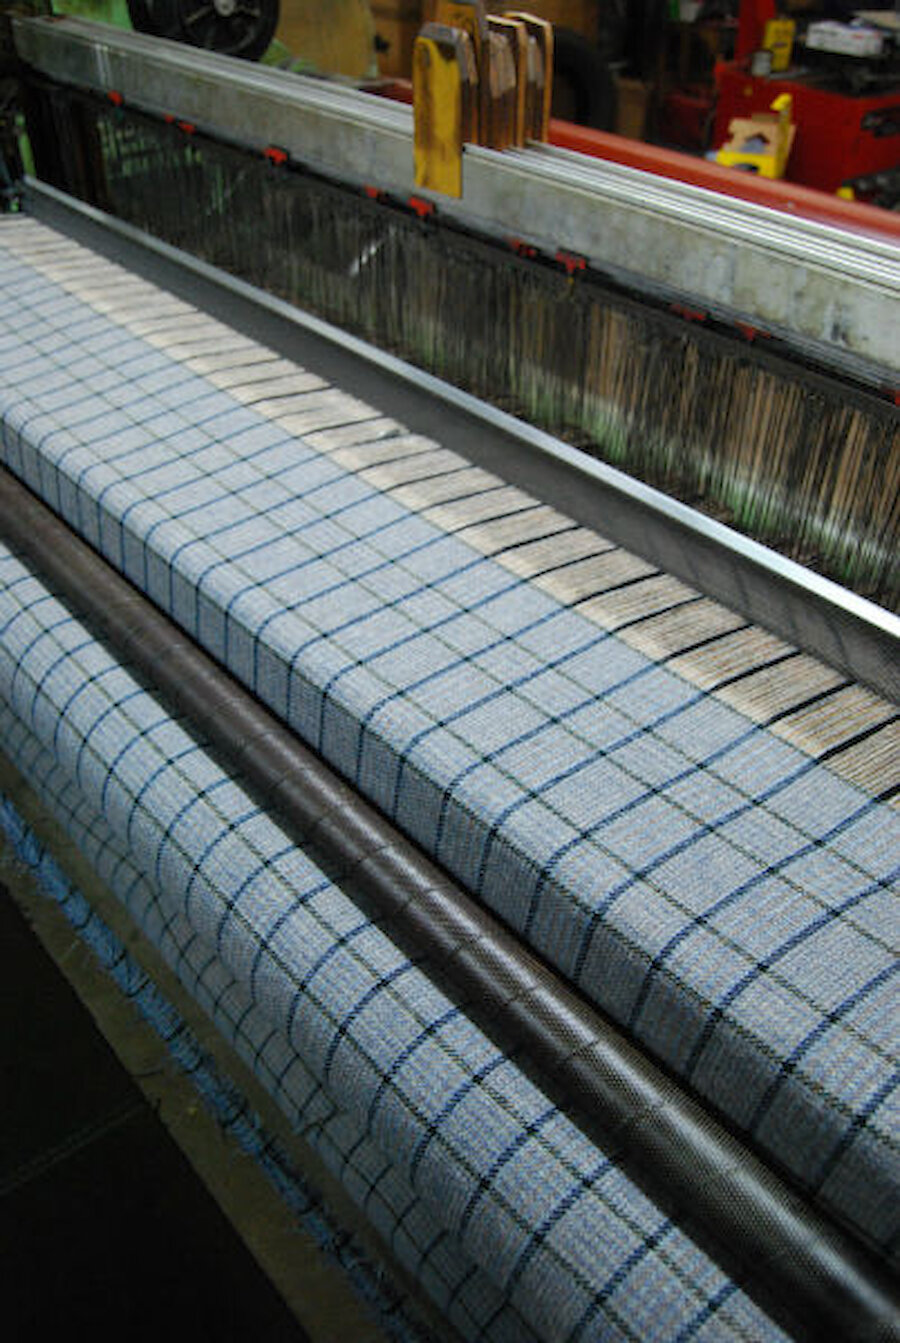 Tweed is woven at Jamieson's in Sandness (Courtesy Alastair Hamilton)